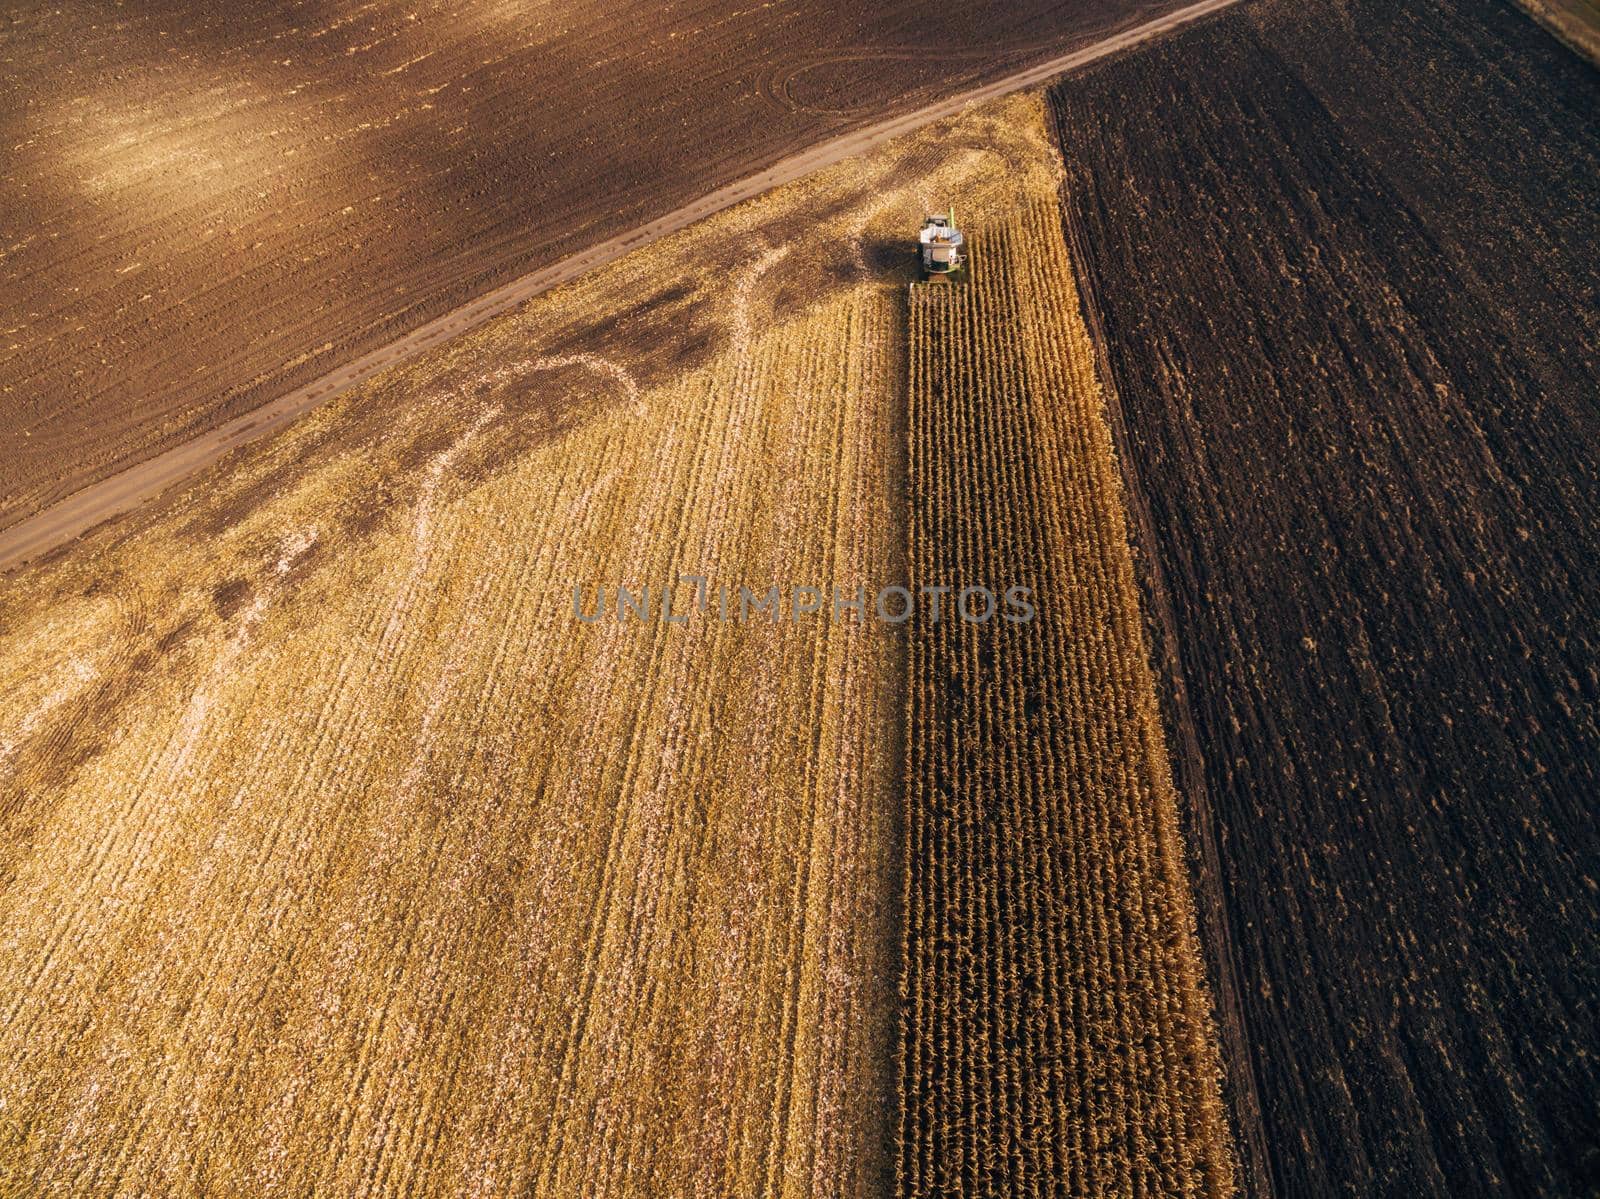 Harvesting Corn in the Green Big Field. Aerial View over Automated Combines by TrEKone